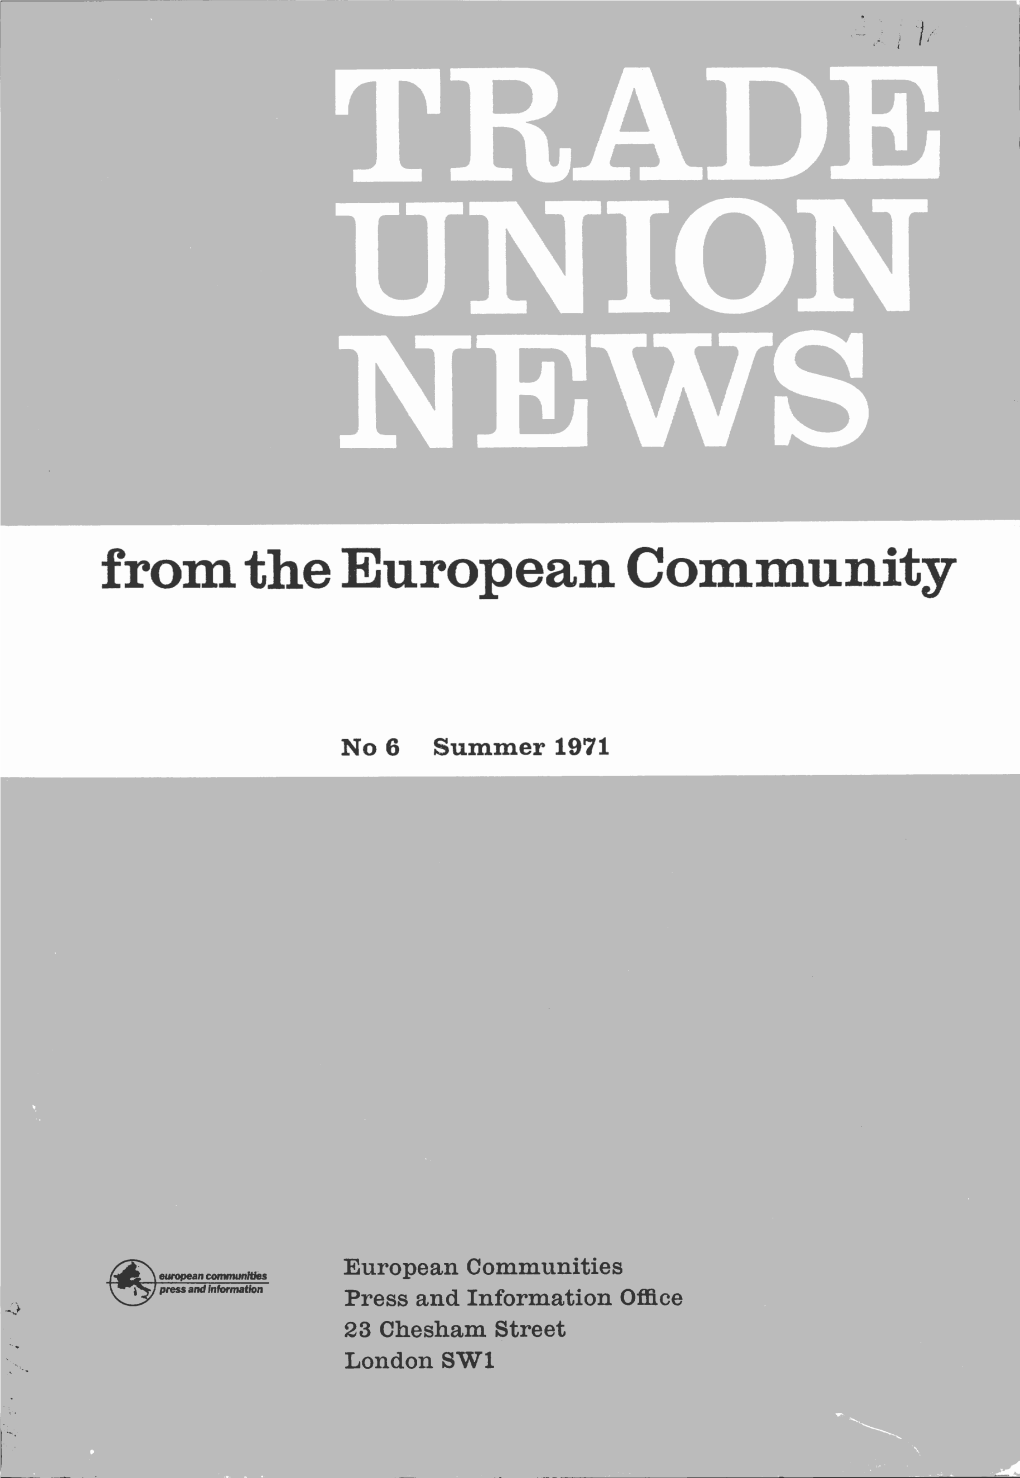 Trade Union News from the European Community No. 6 Summer 1971